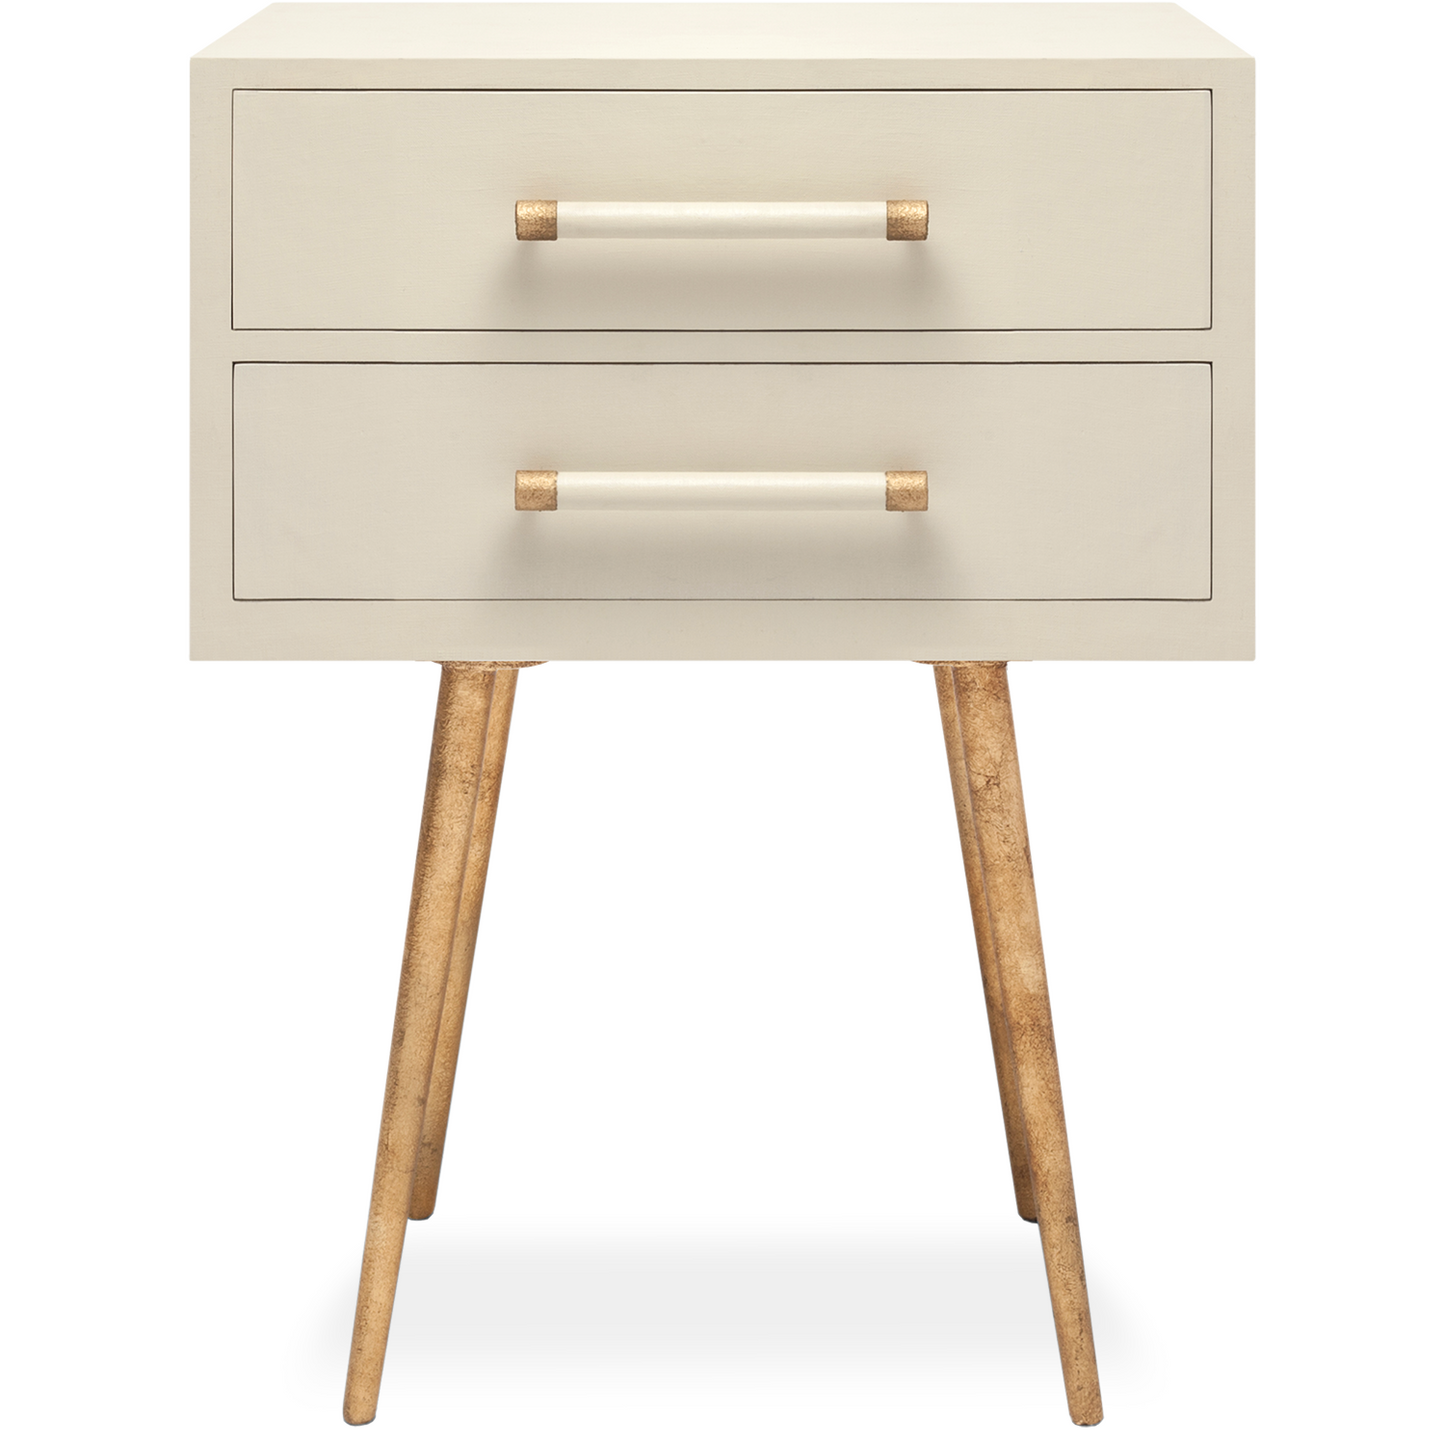 65% Off Clearance Sale: Made Goods Alene Ivory Color Nightstand (Store Display Model)